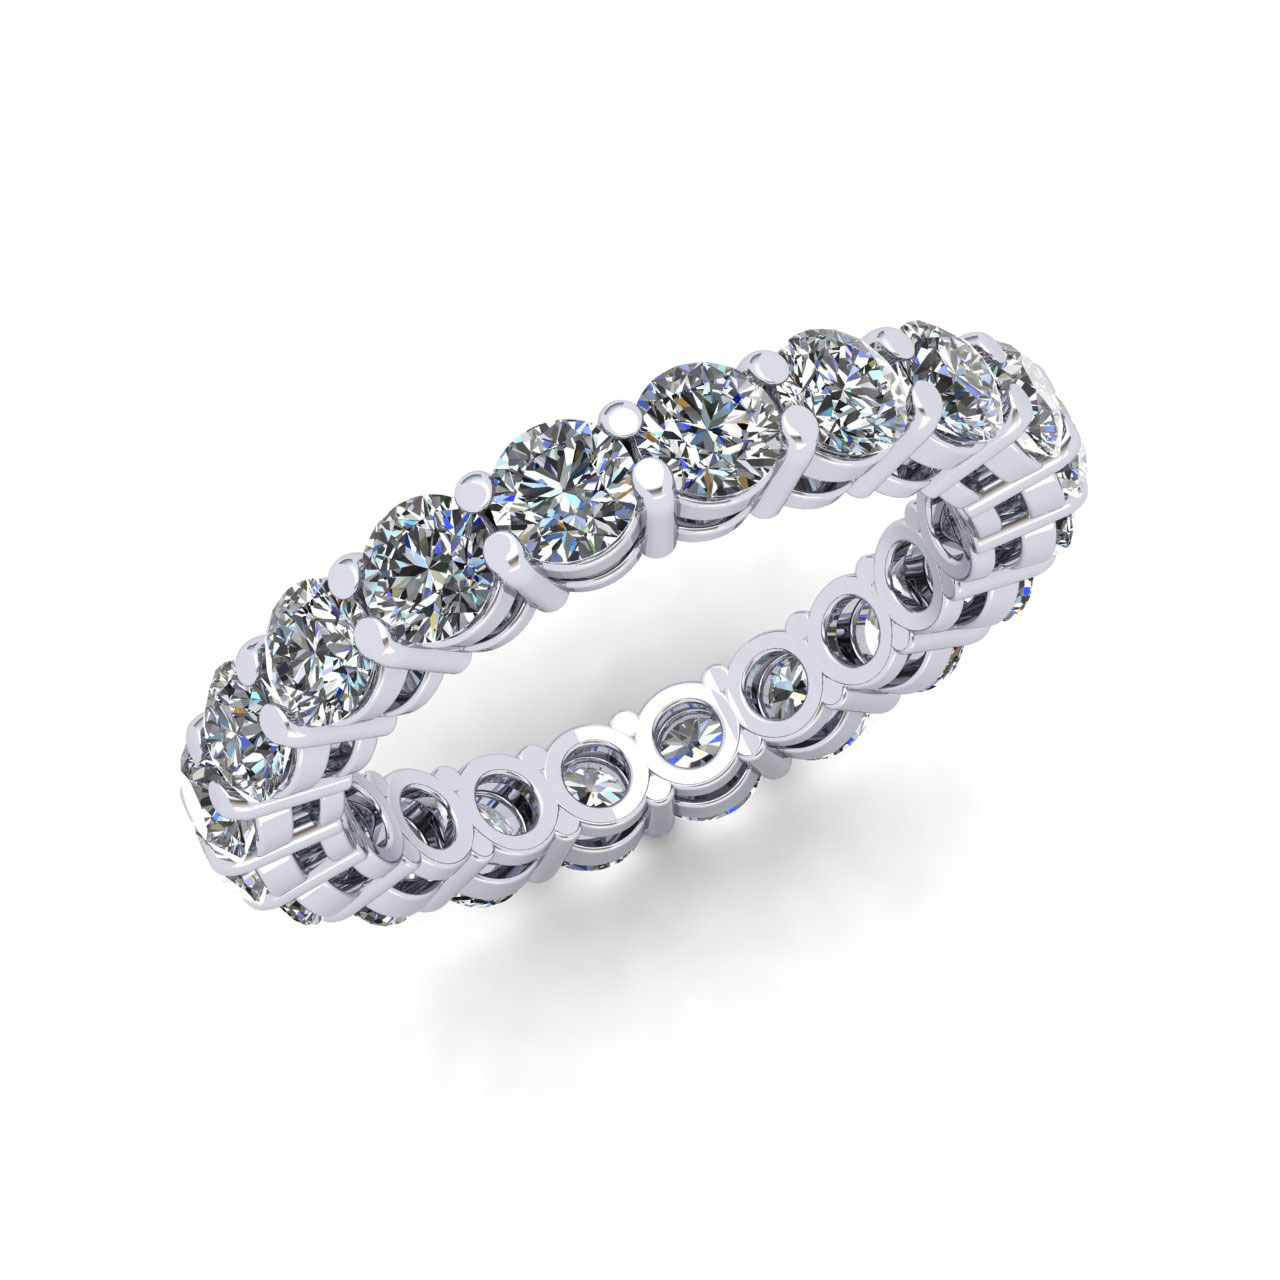 Jewel We Sell Natural 3.00Ct Round Diamond Shared Prong Gallery Ladies Anniversary Wedding Eternity Band Ring Solid 10k White Gold G-H I1